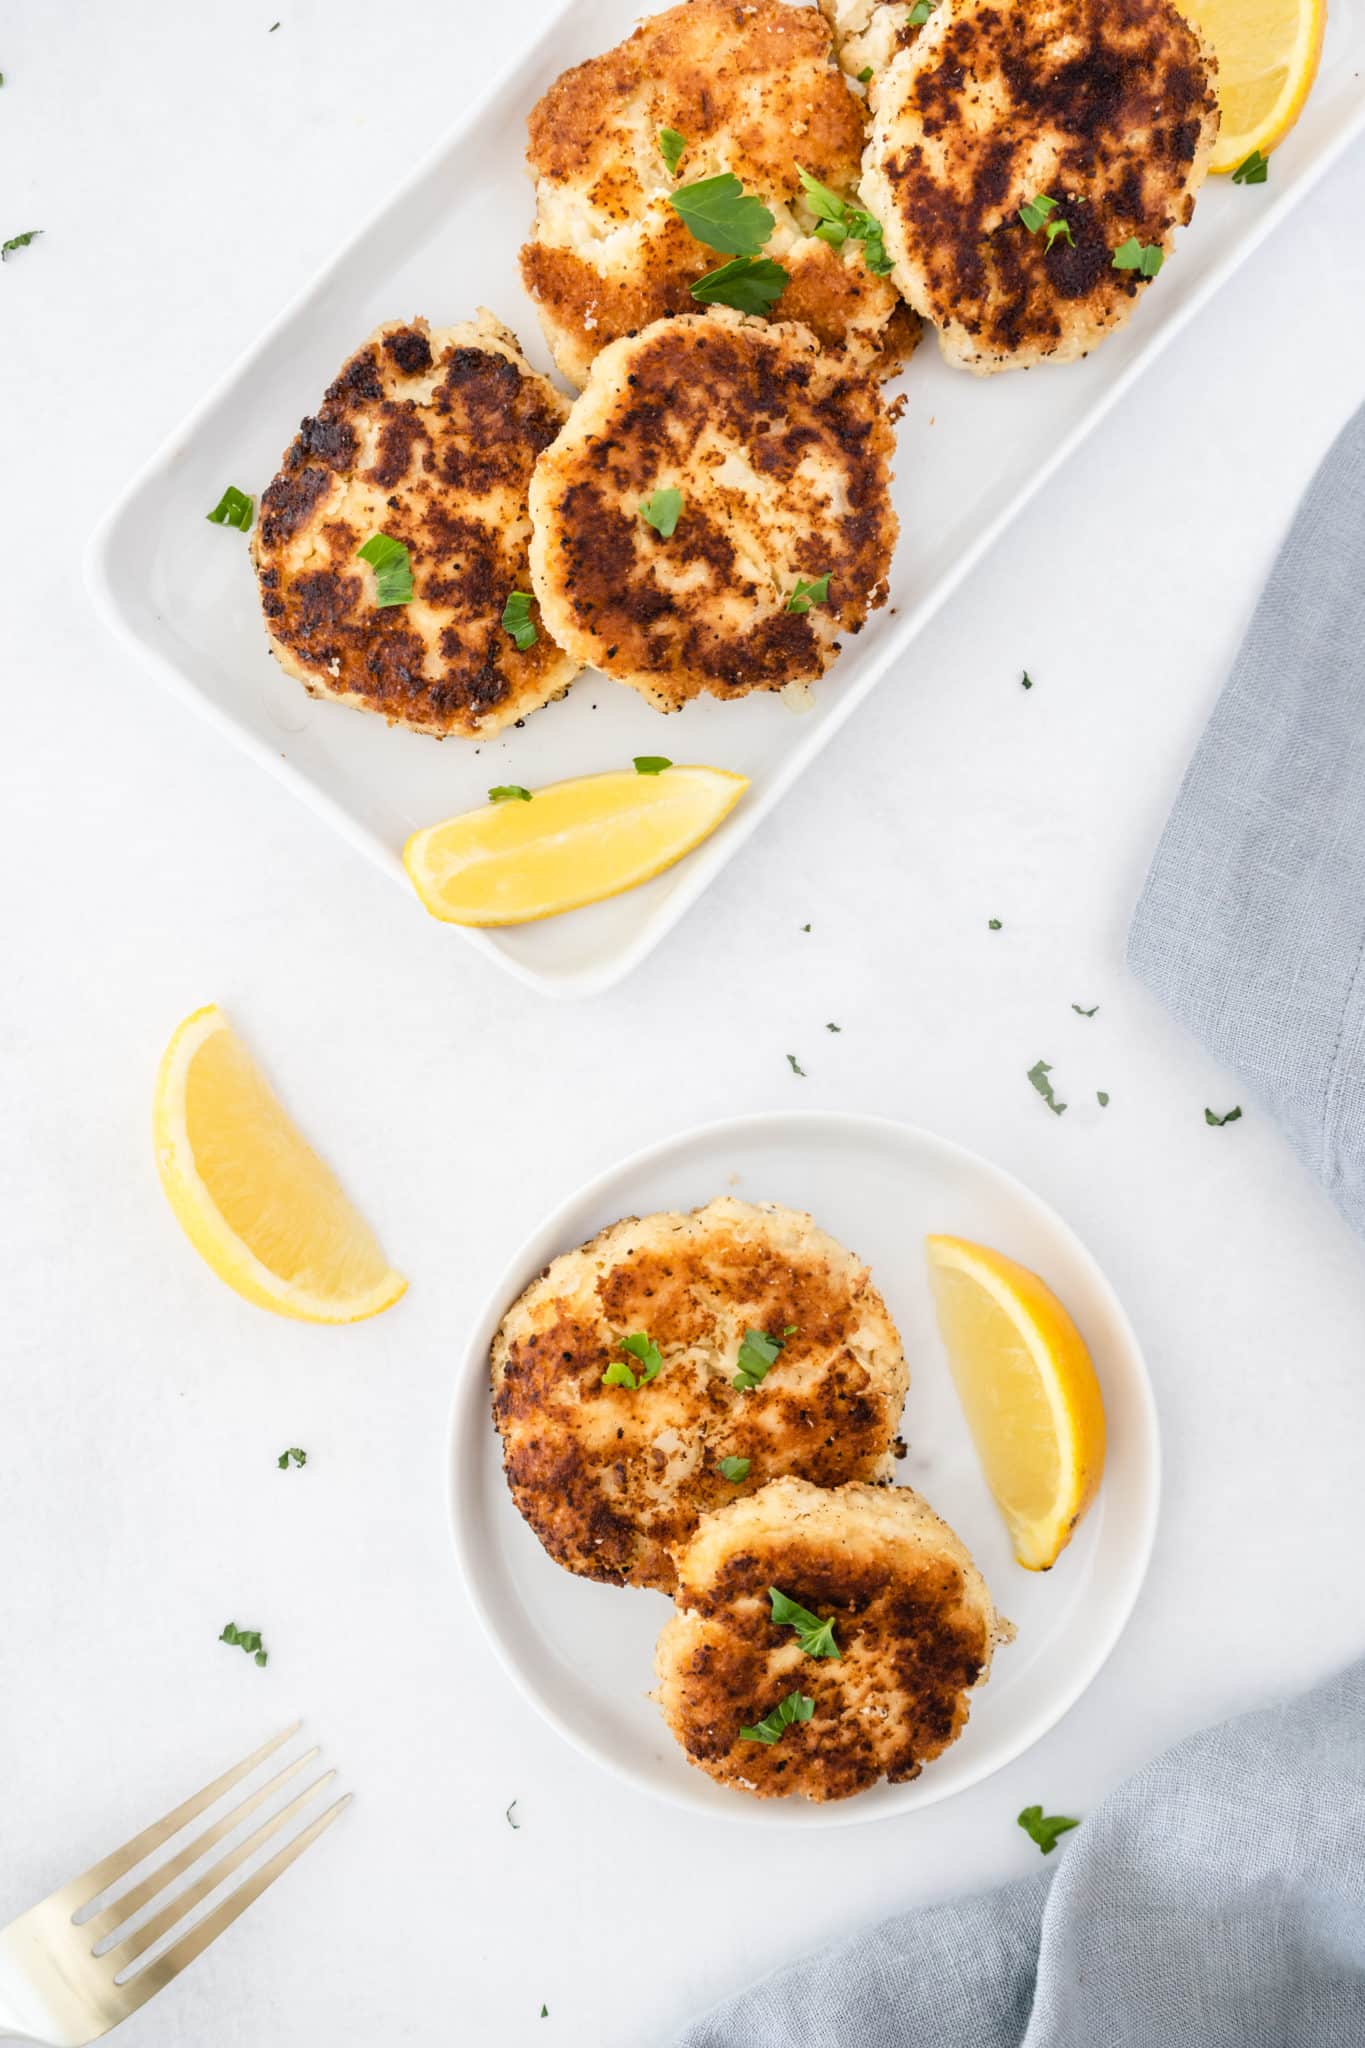 gluten-free crab cakes served with fresh parsley and lemon slices.